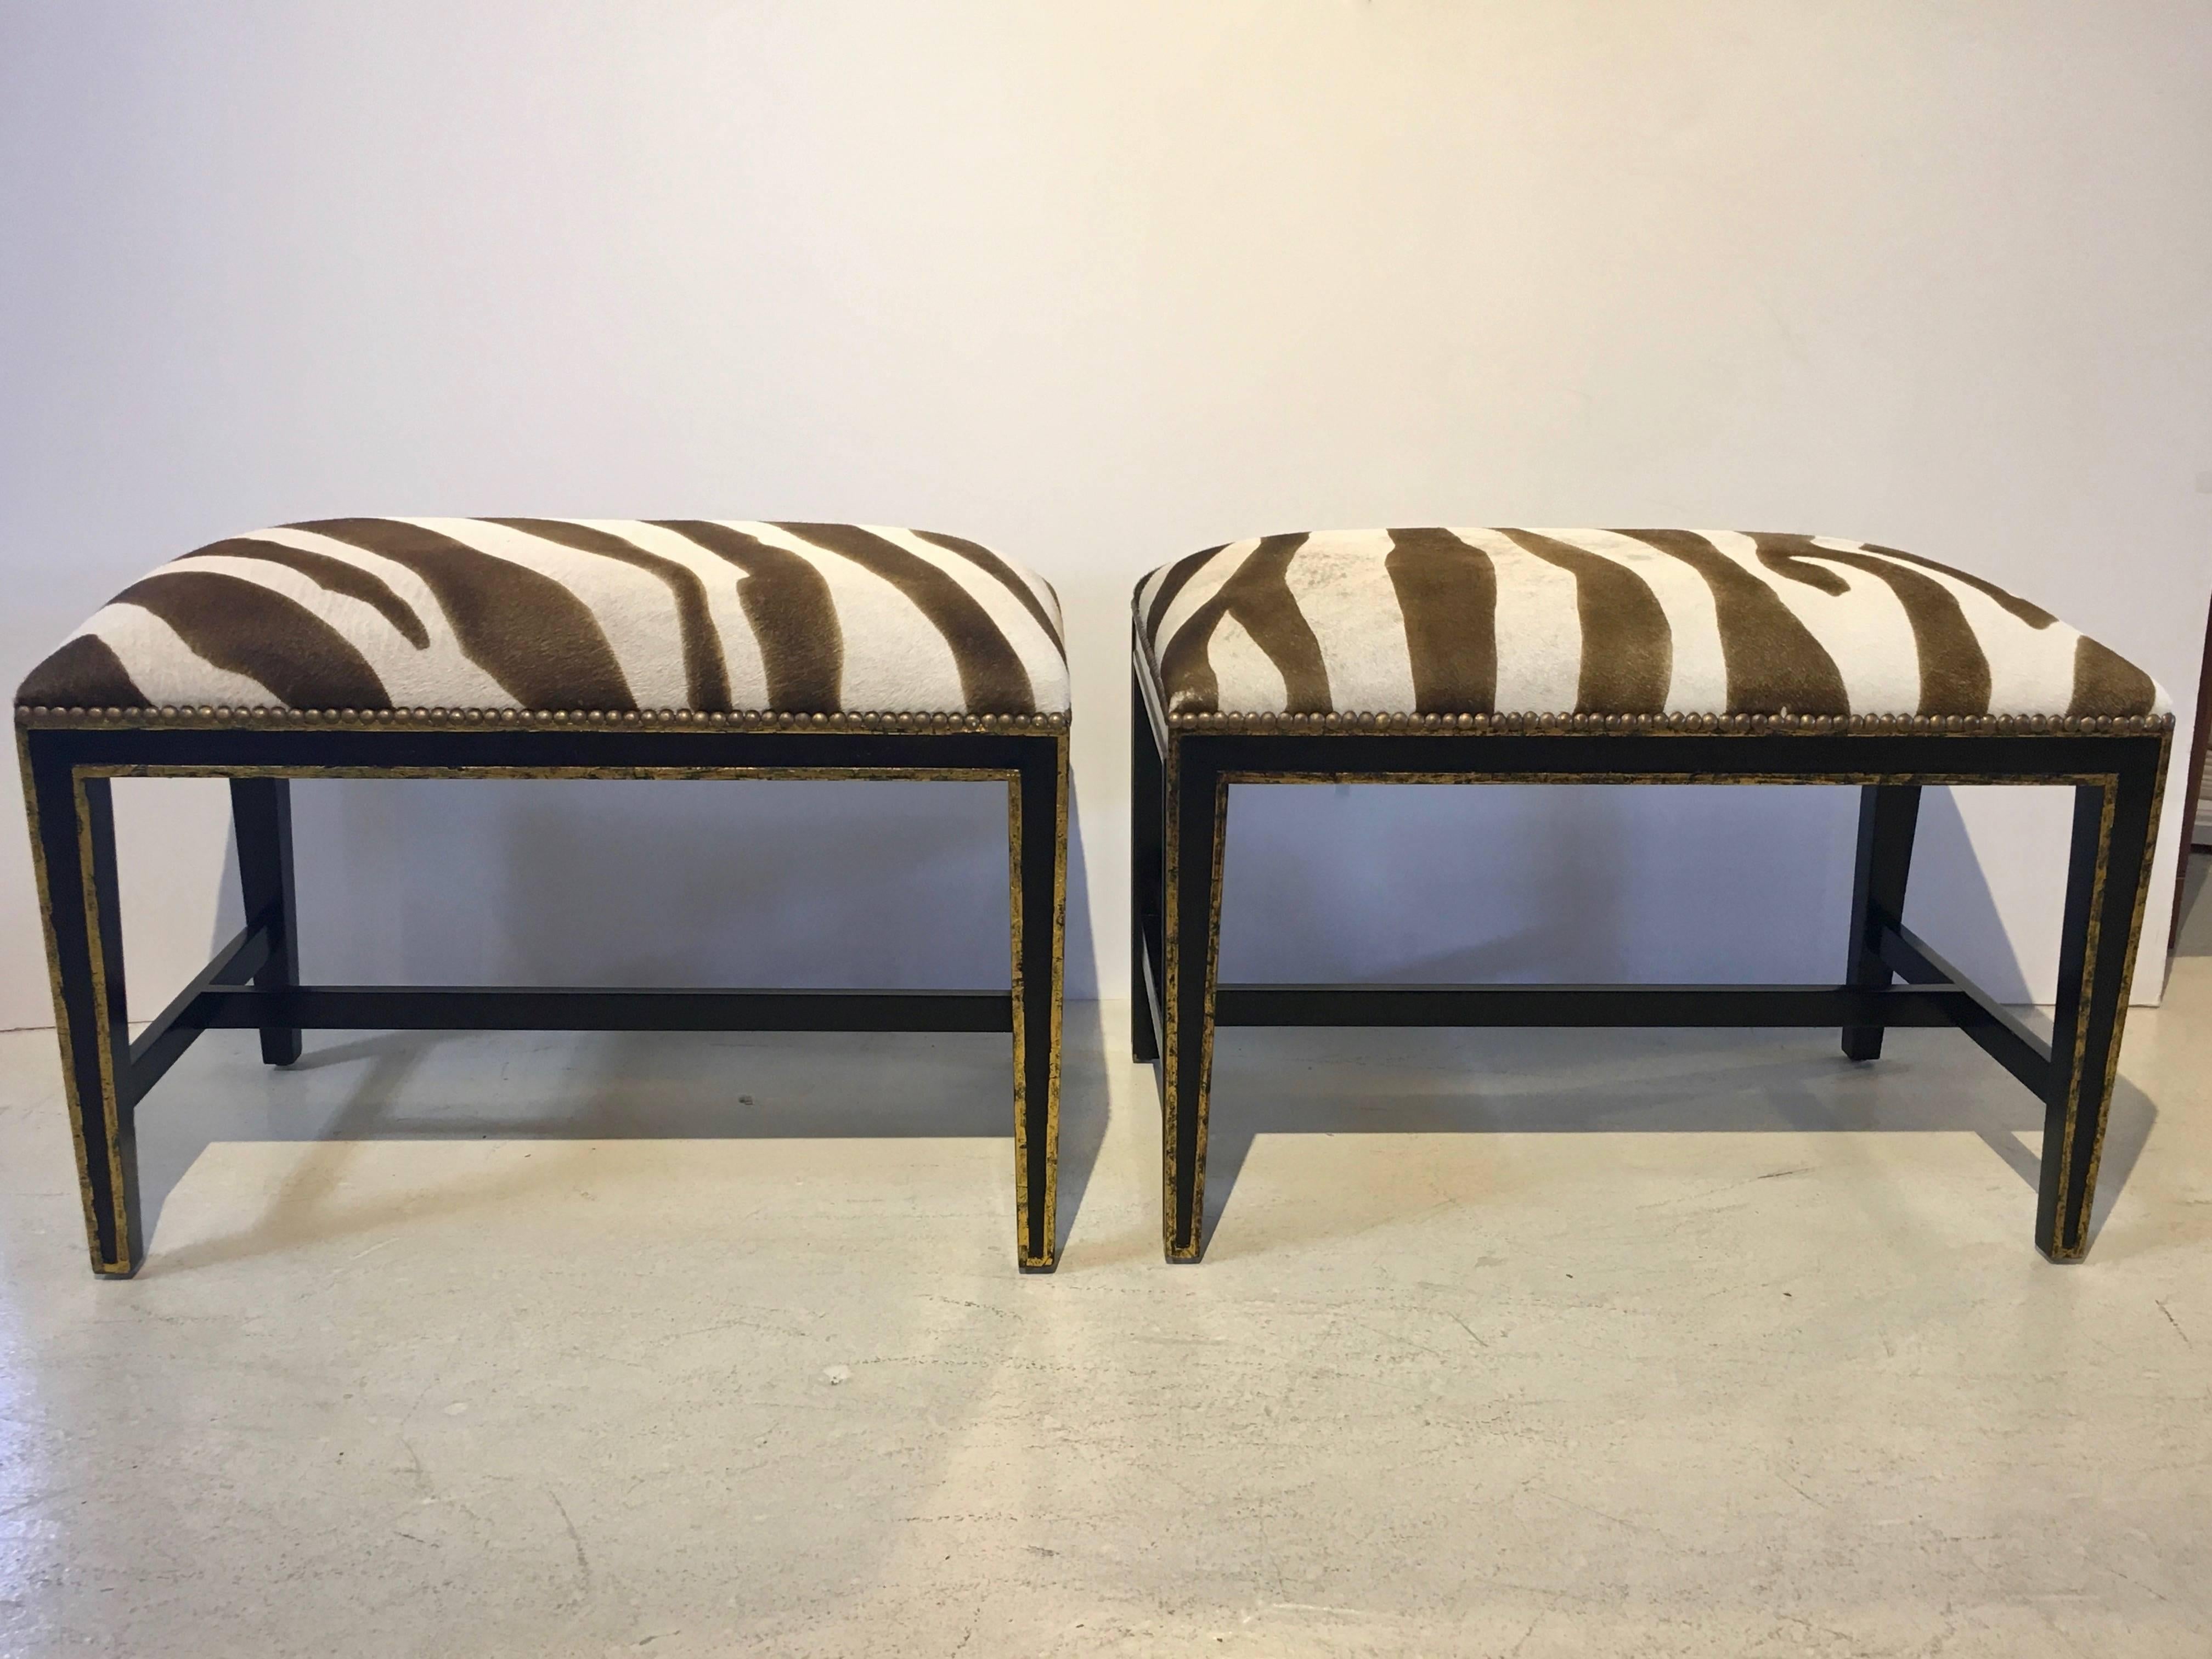 Contemporary Zebra Printed Hide Pair of Ottomans or Benches, with Brass Nailhead Detailing